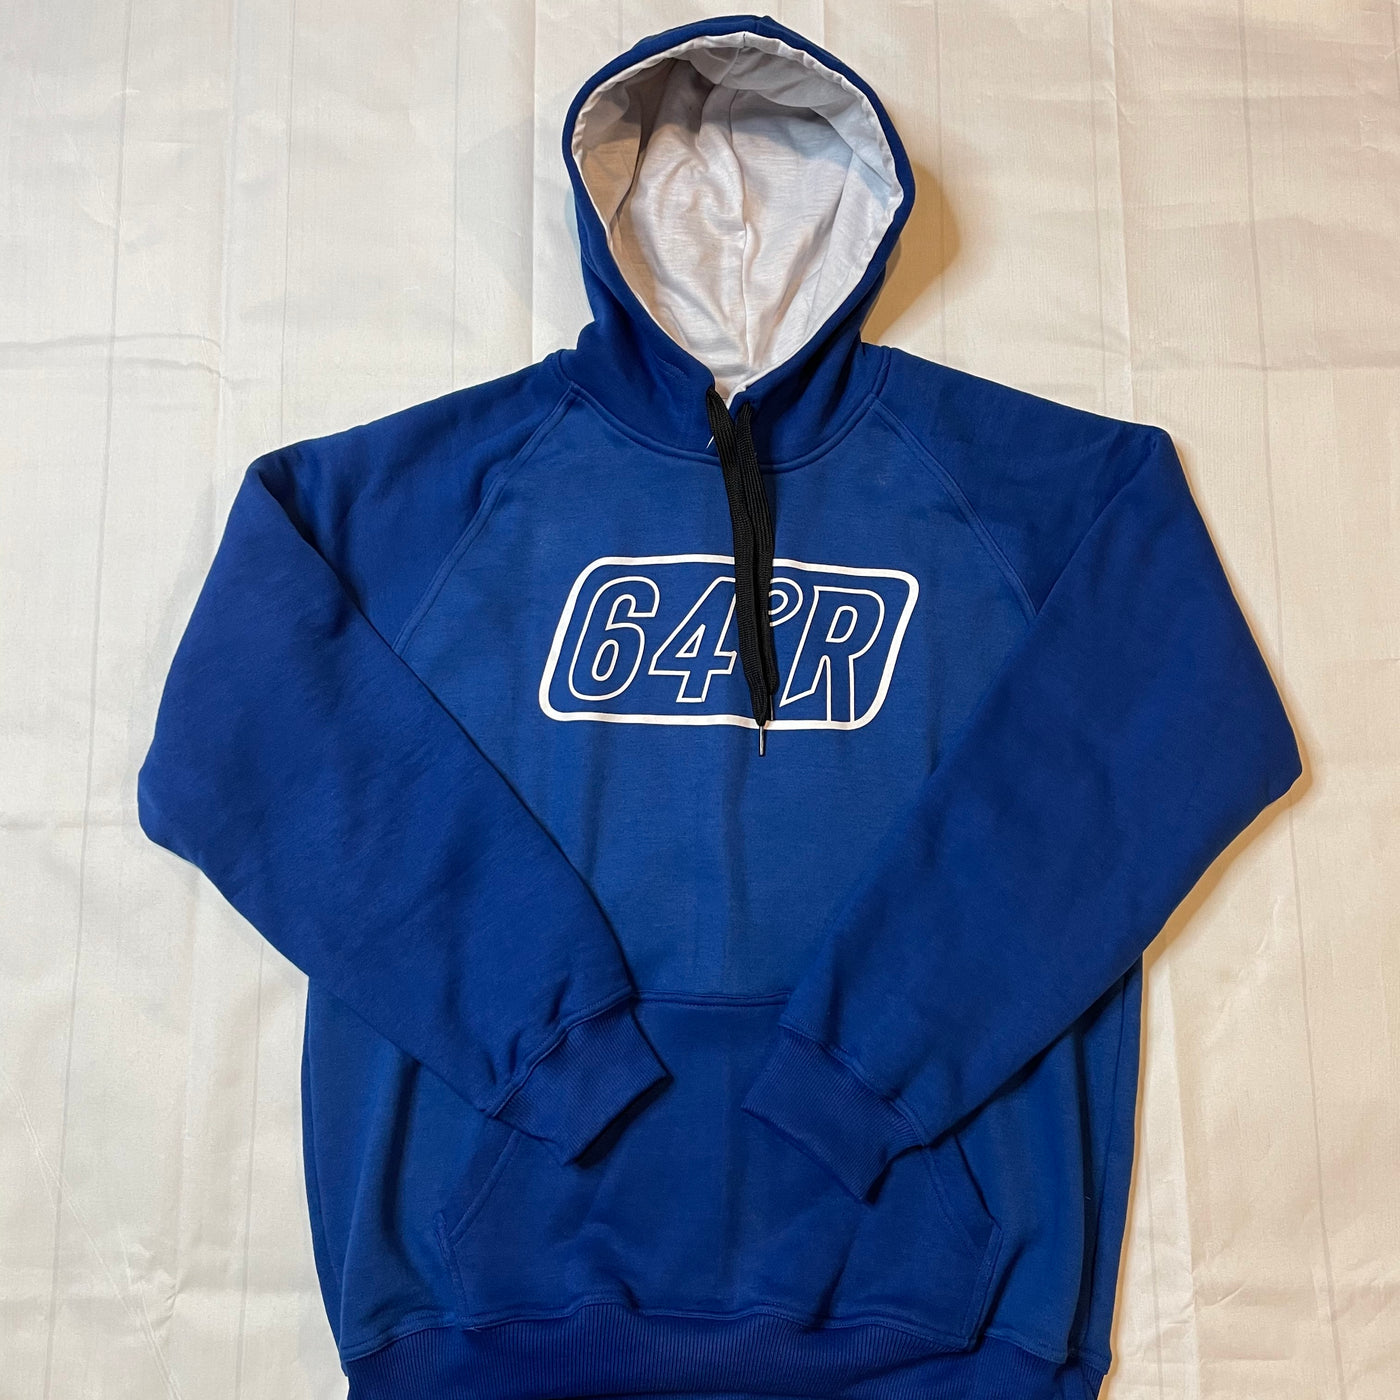 Blue with white logo hoodie